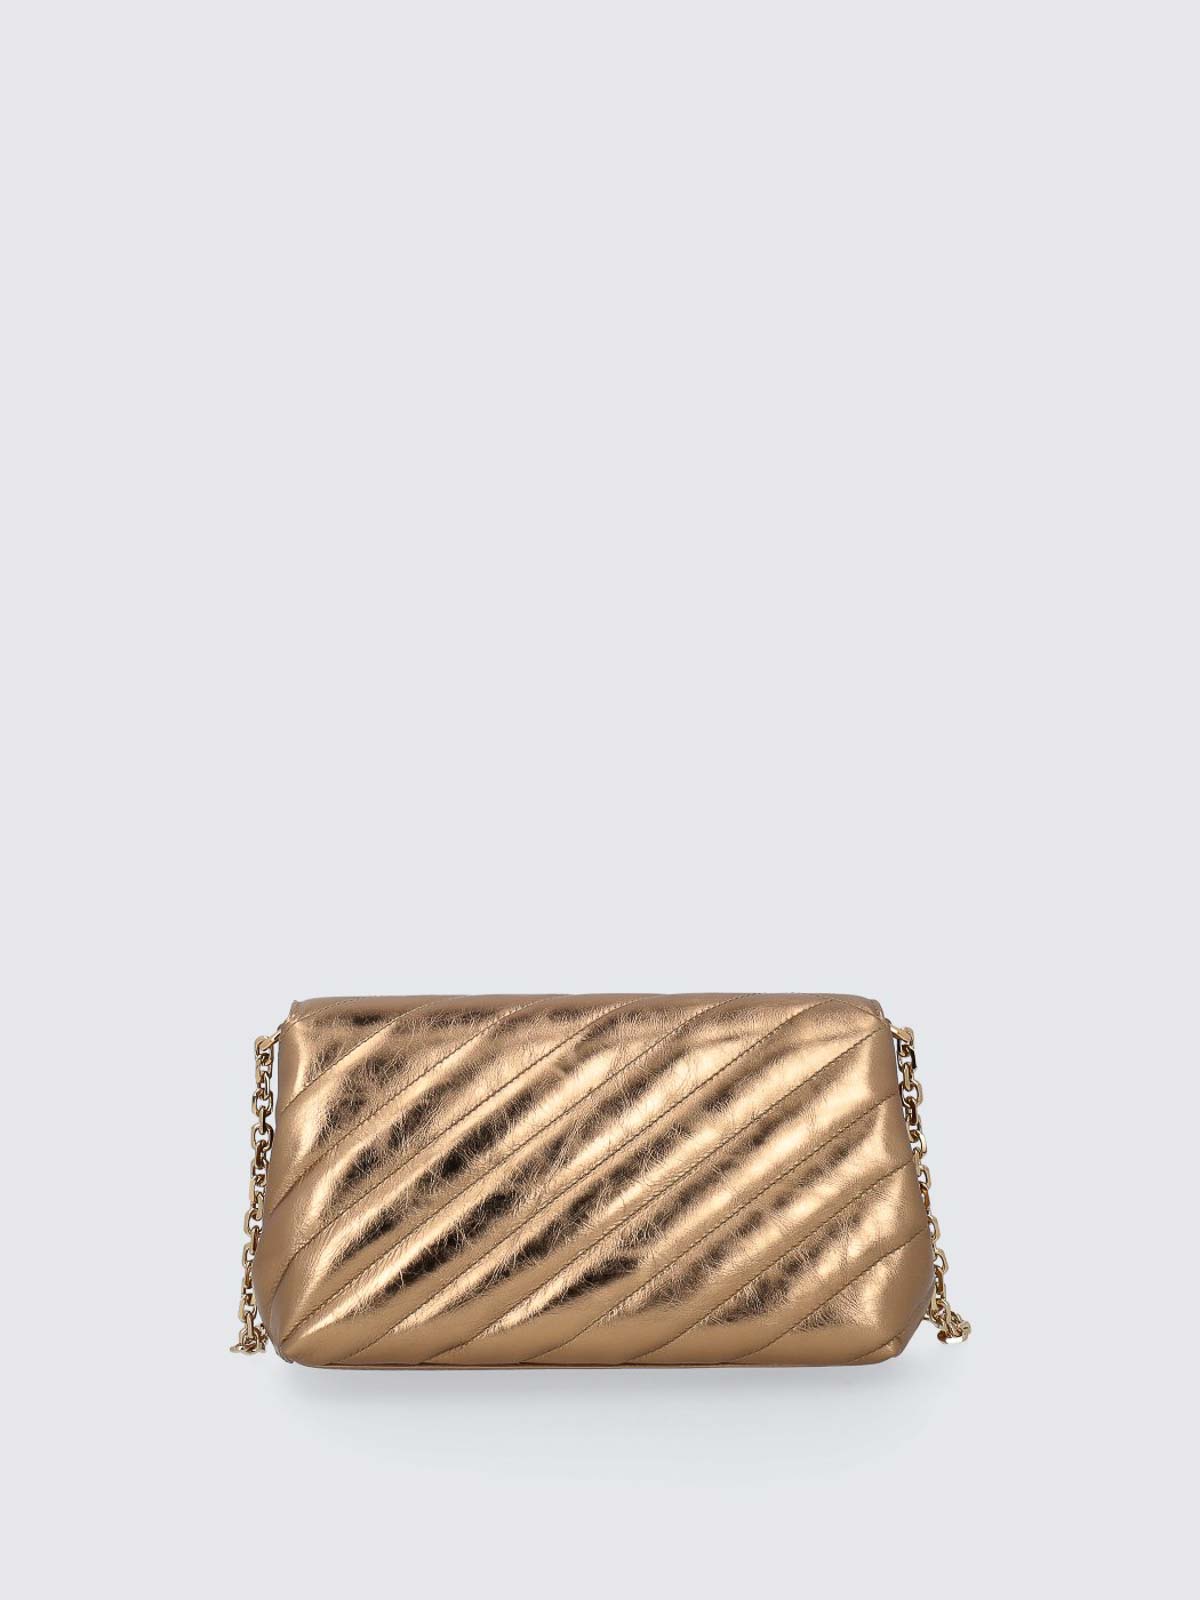 Forever 21 small quilted bag | Quilted bag, Quilted purses, Snakeskin  crossbody bag